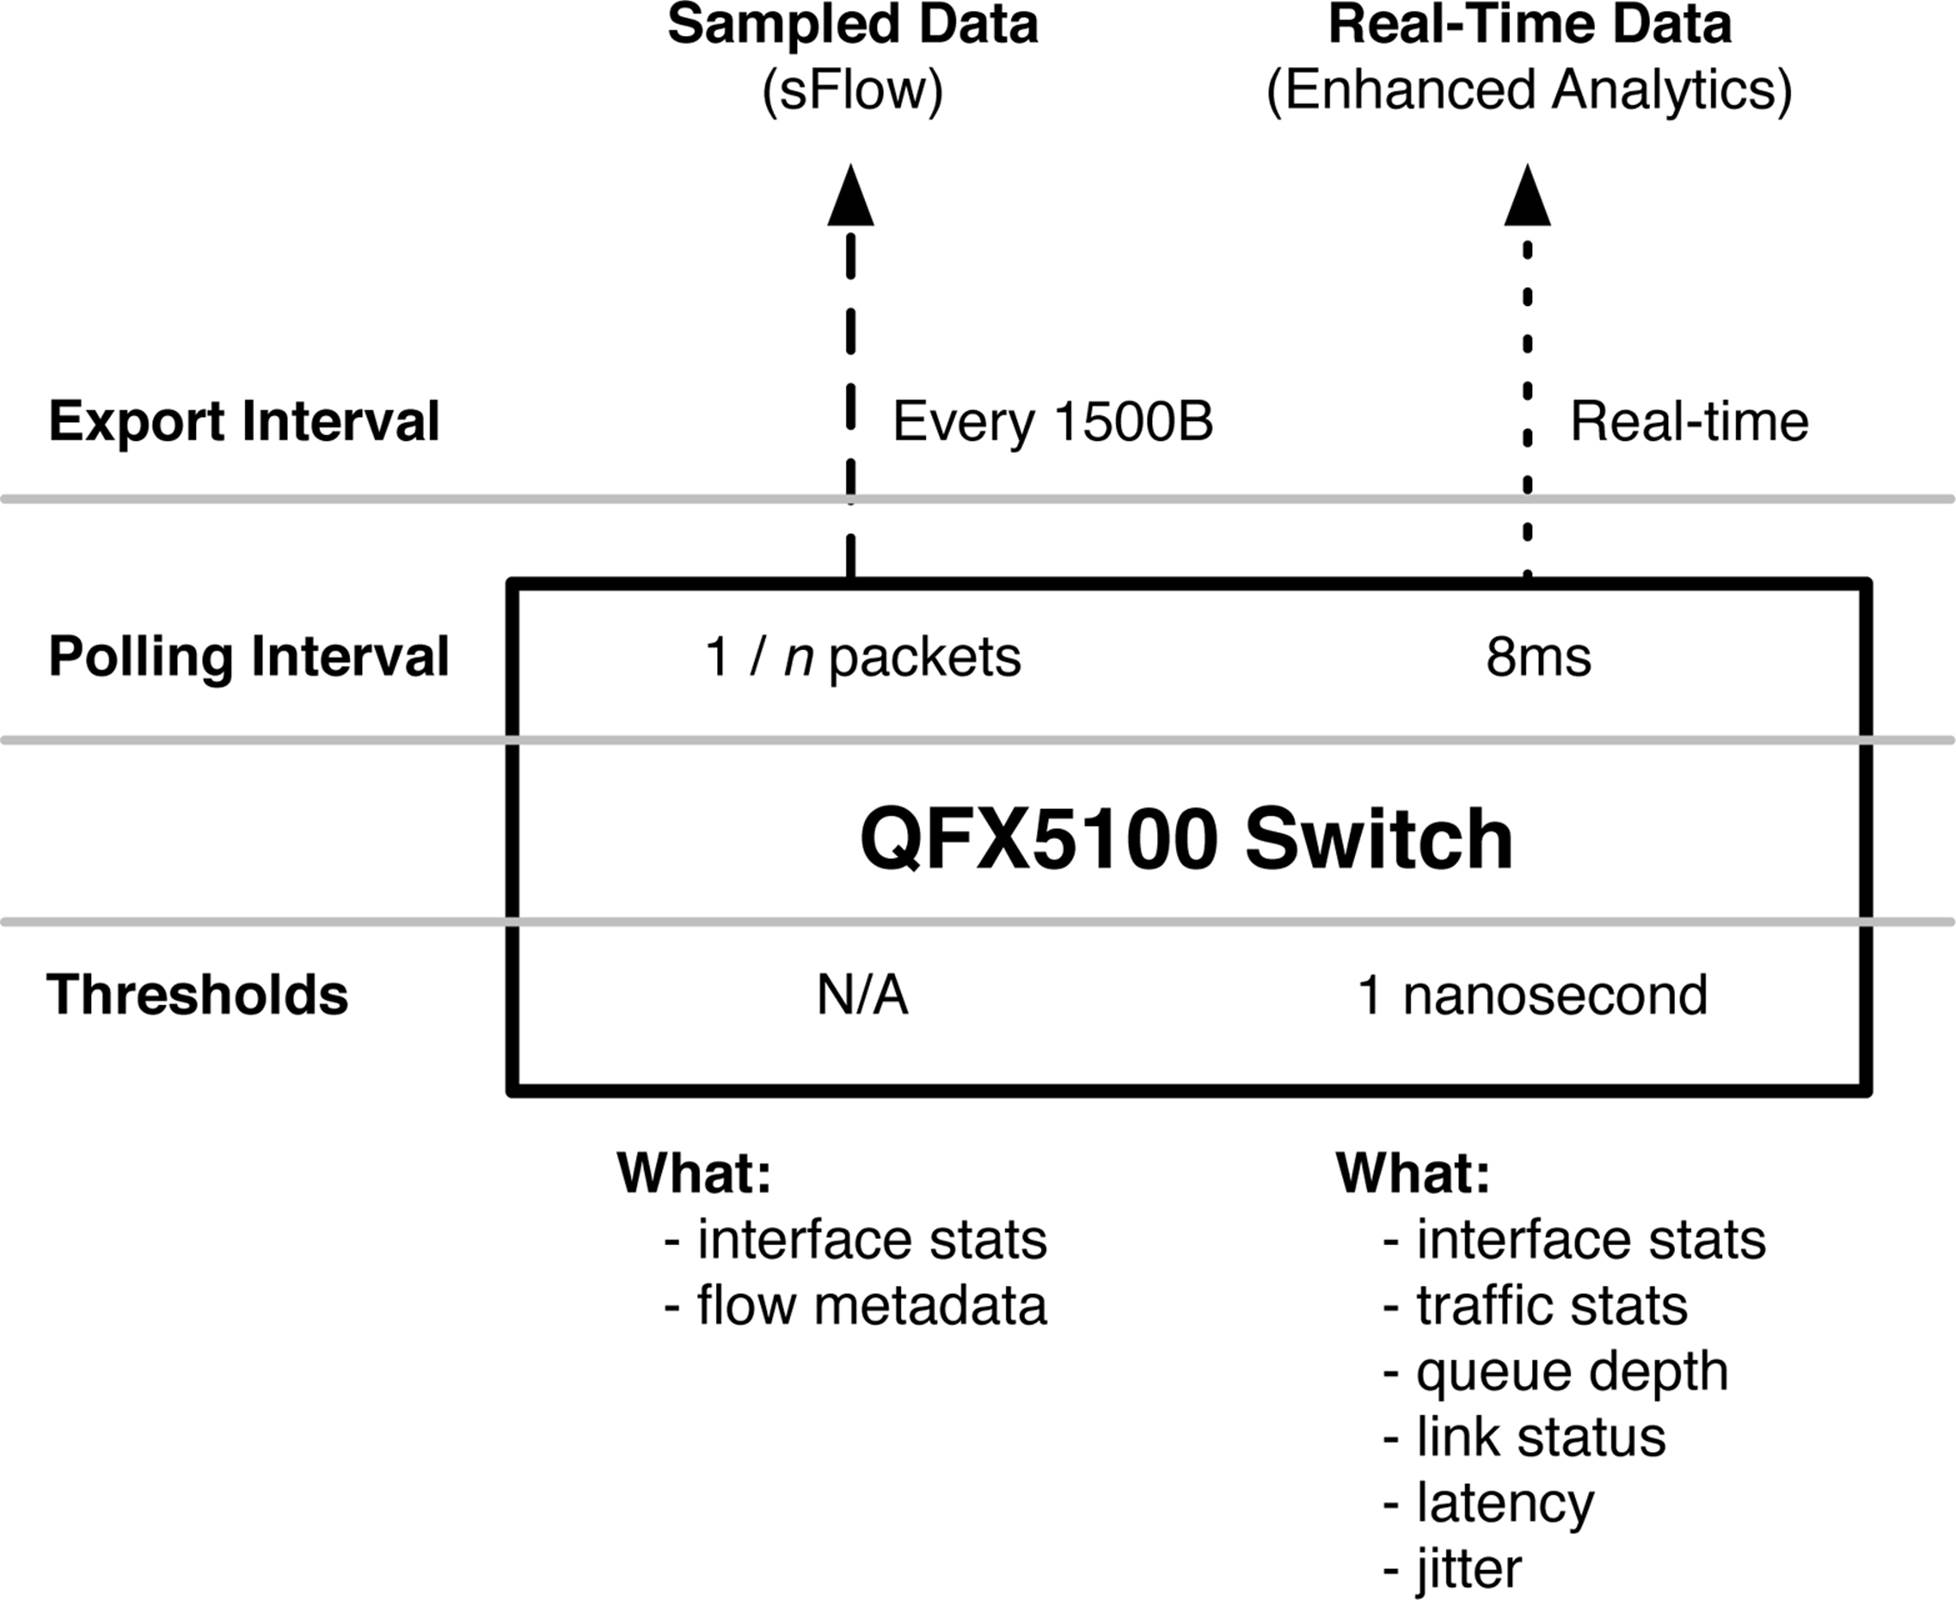 Overview of network analytics on the Juniper QFX5100 switch